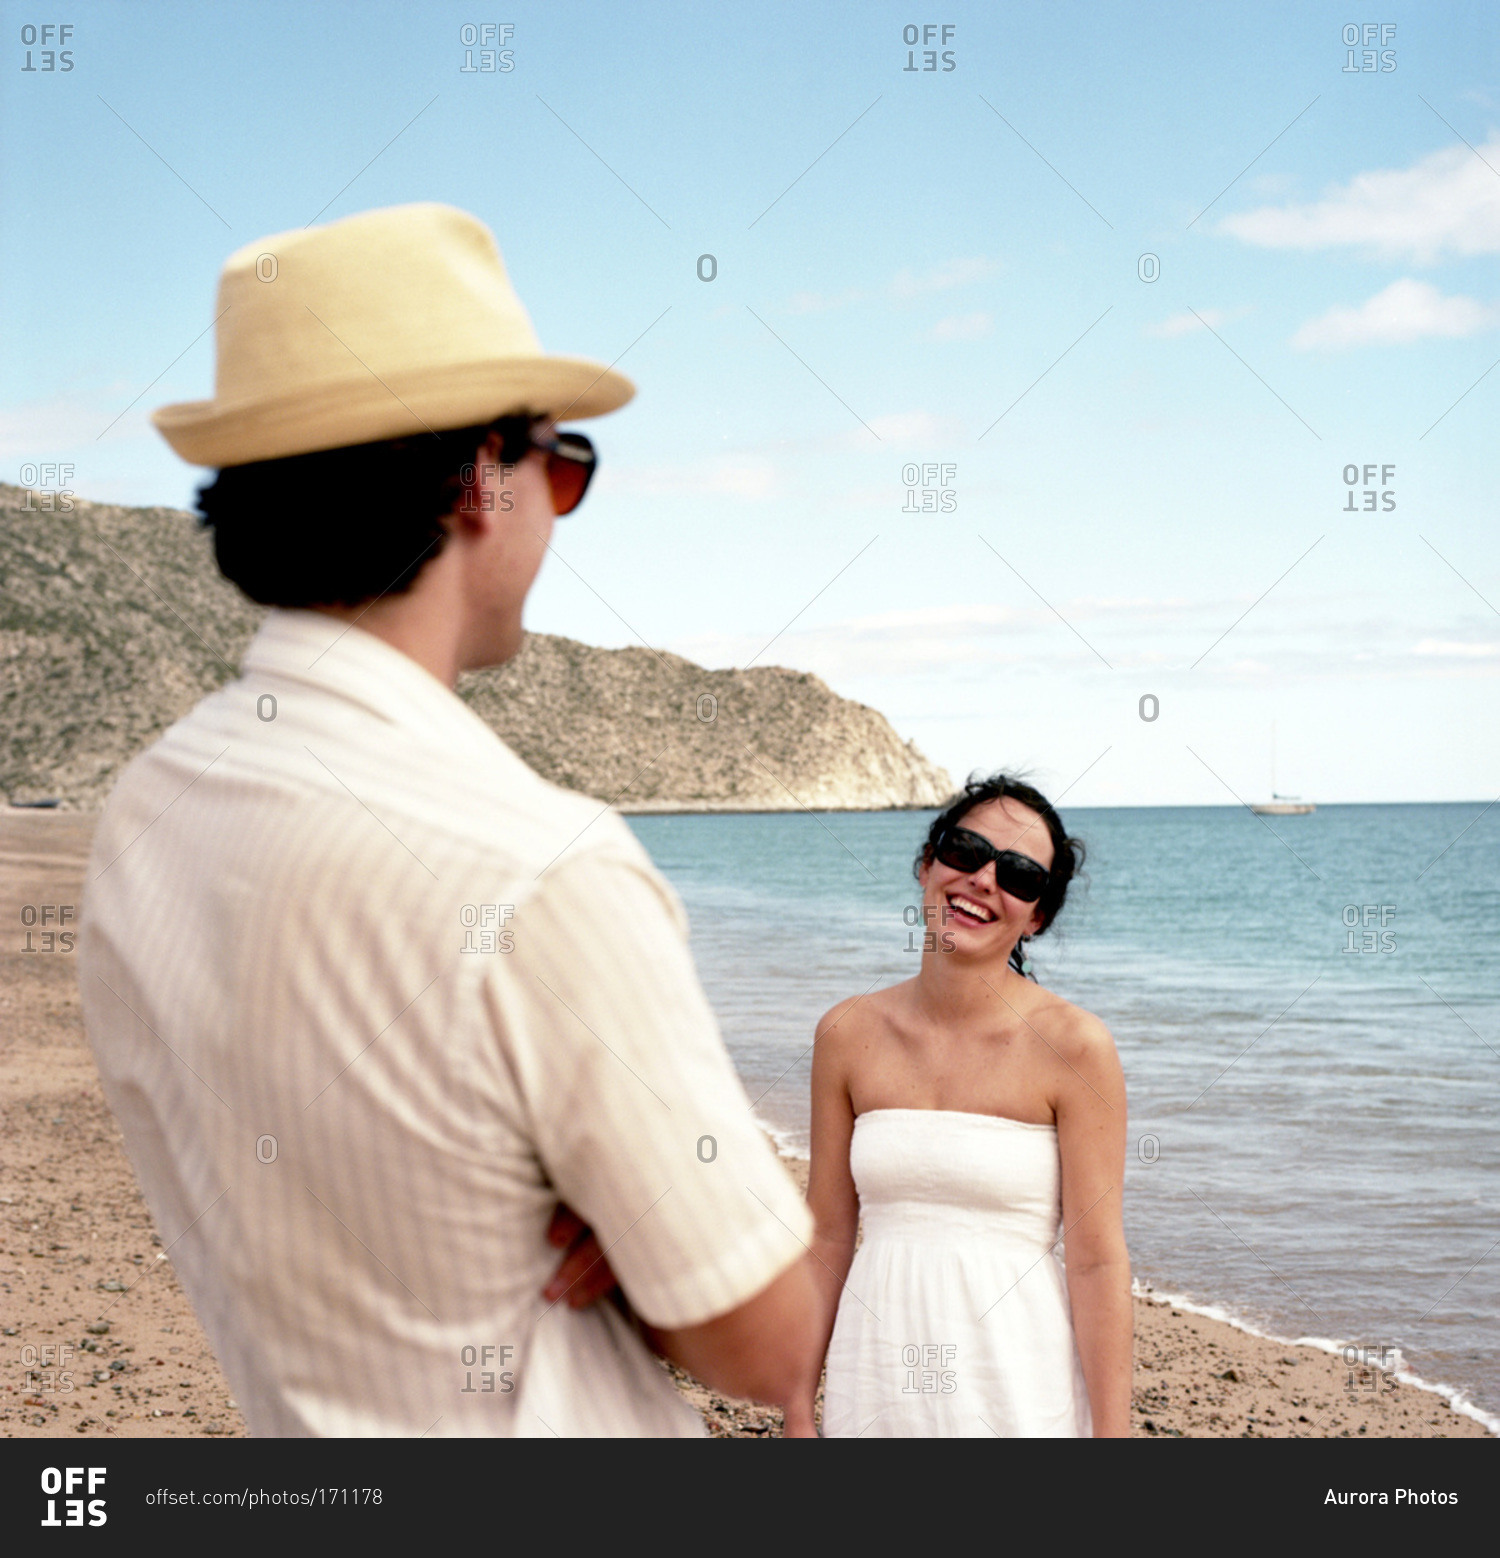 A woman smiles at her boyfriend as she walks down the beach on a sunny afternoon wearing a white sun dress